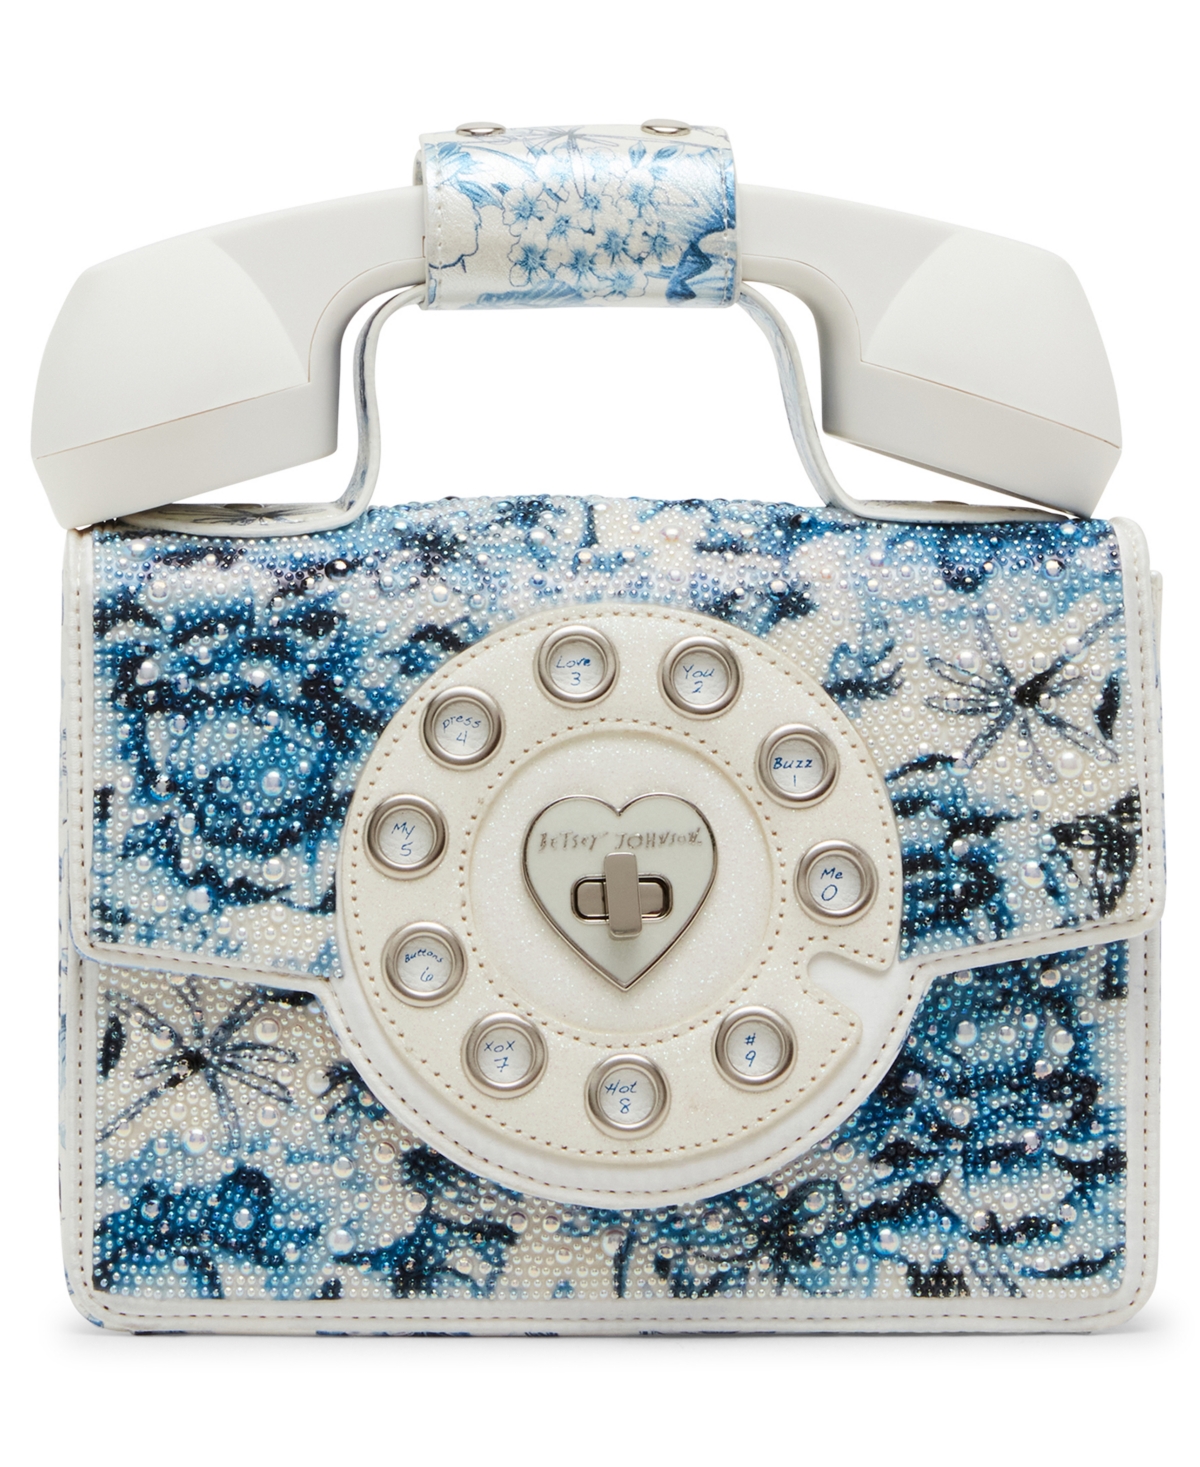 Betsey Johnson Toile Imitation Pearl Phone In Blue Multi